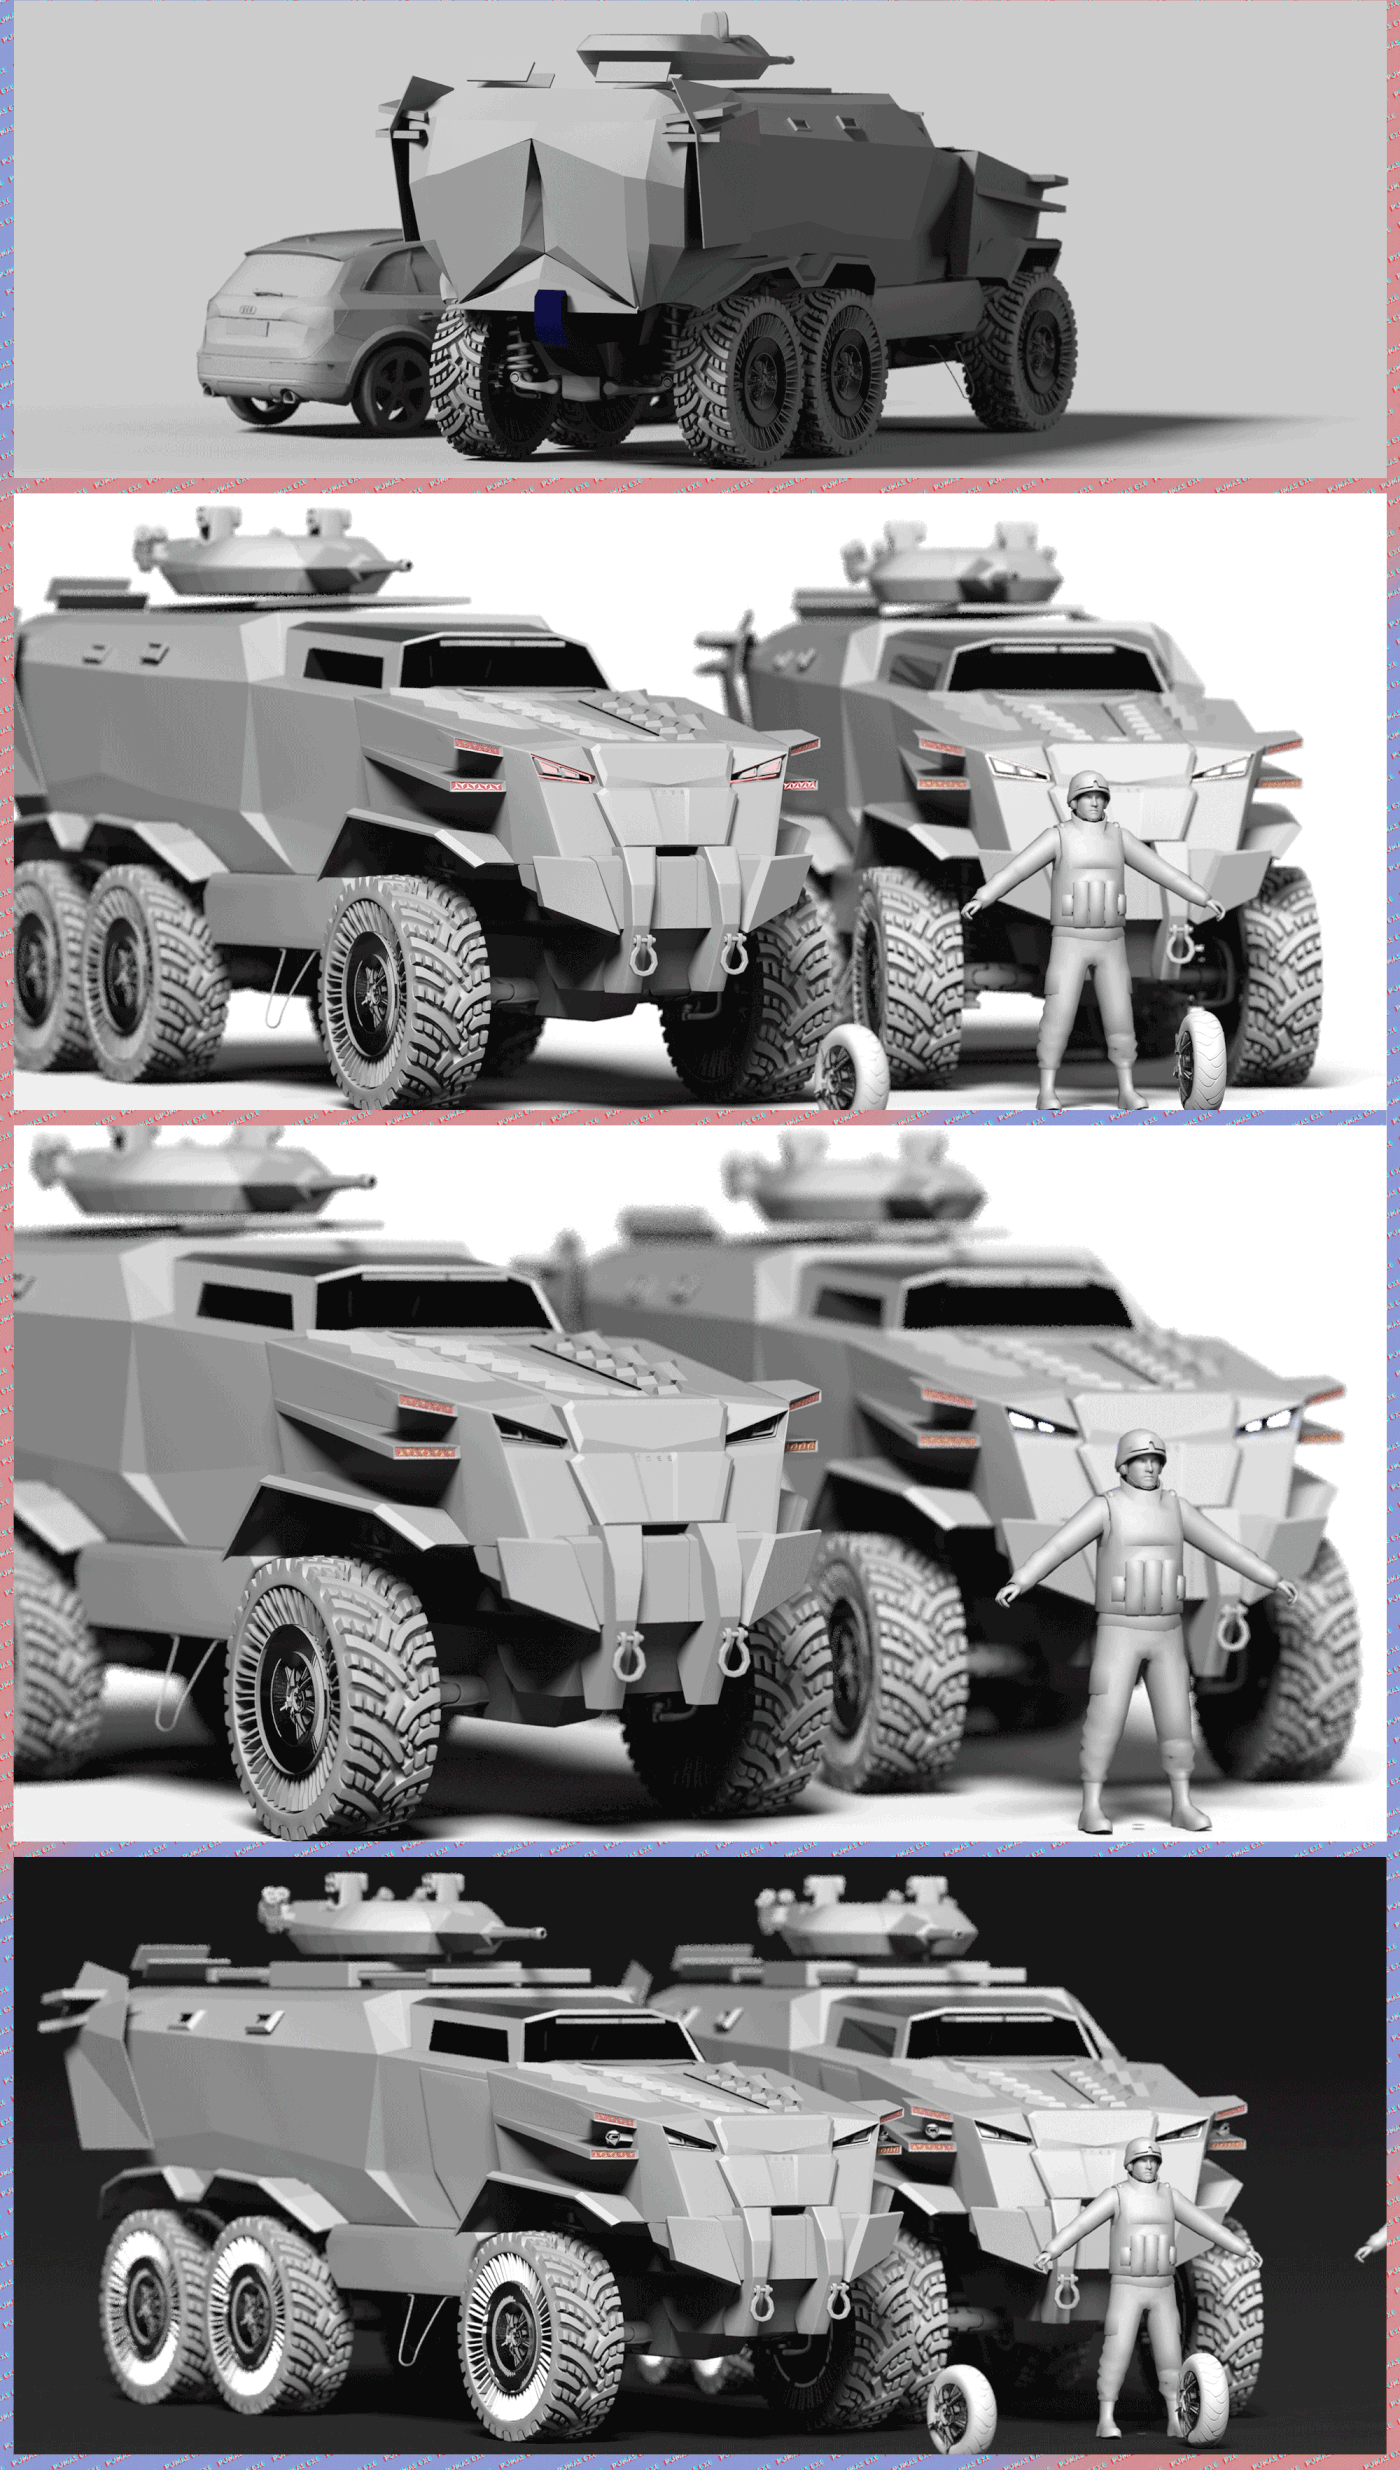 armored apc Truck transportation Vehicle Military police Combat War game